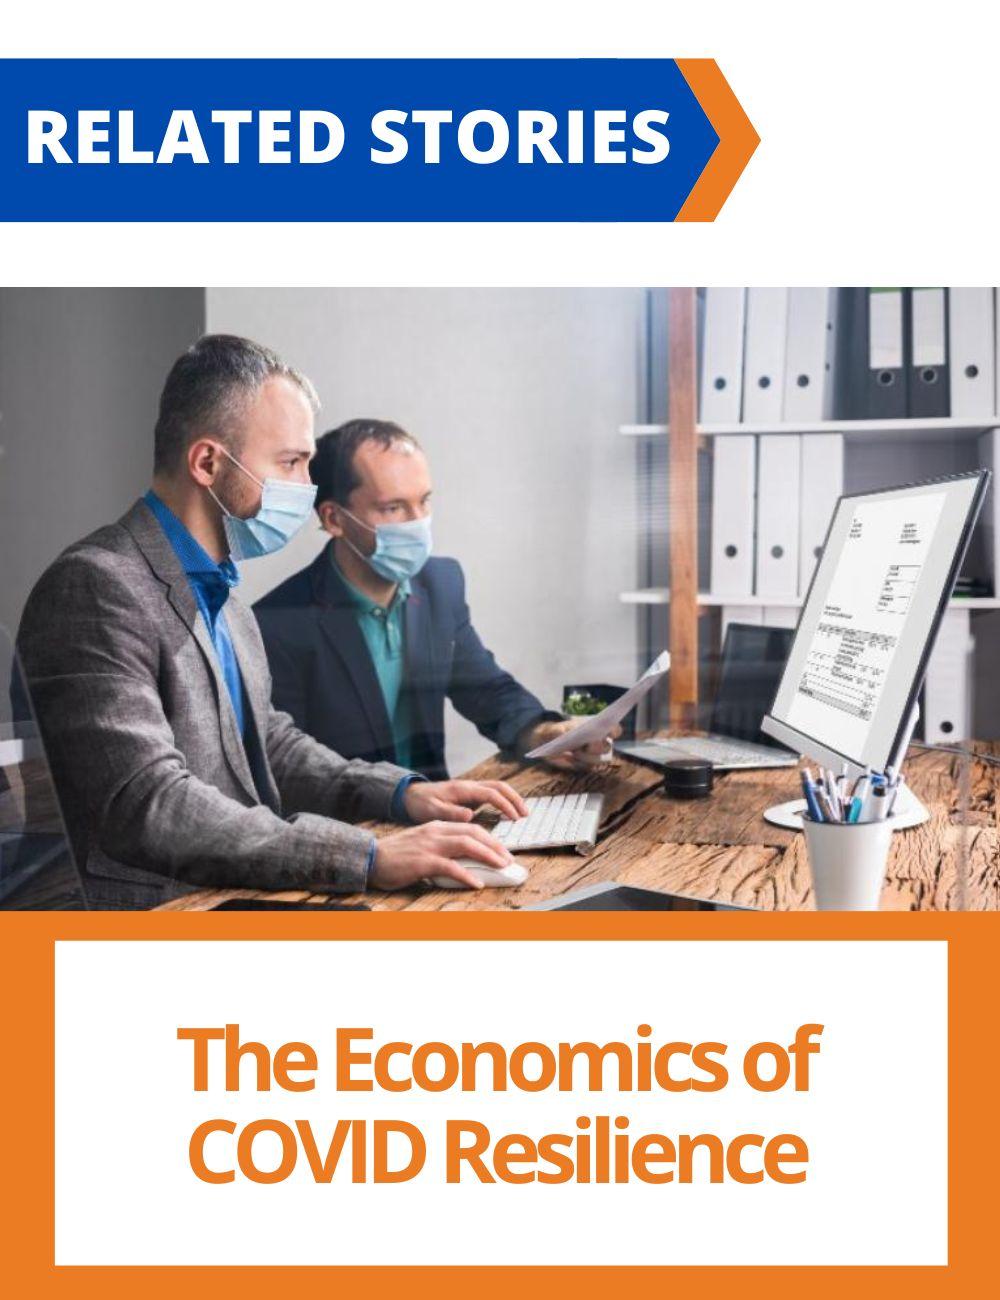  Link to related stories. Image: two men with masks are looking at a computer. Story headline: The Economics of COVID Resilience